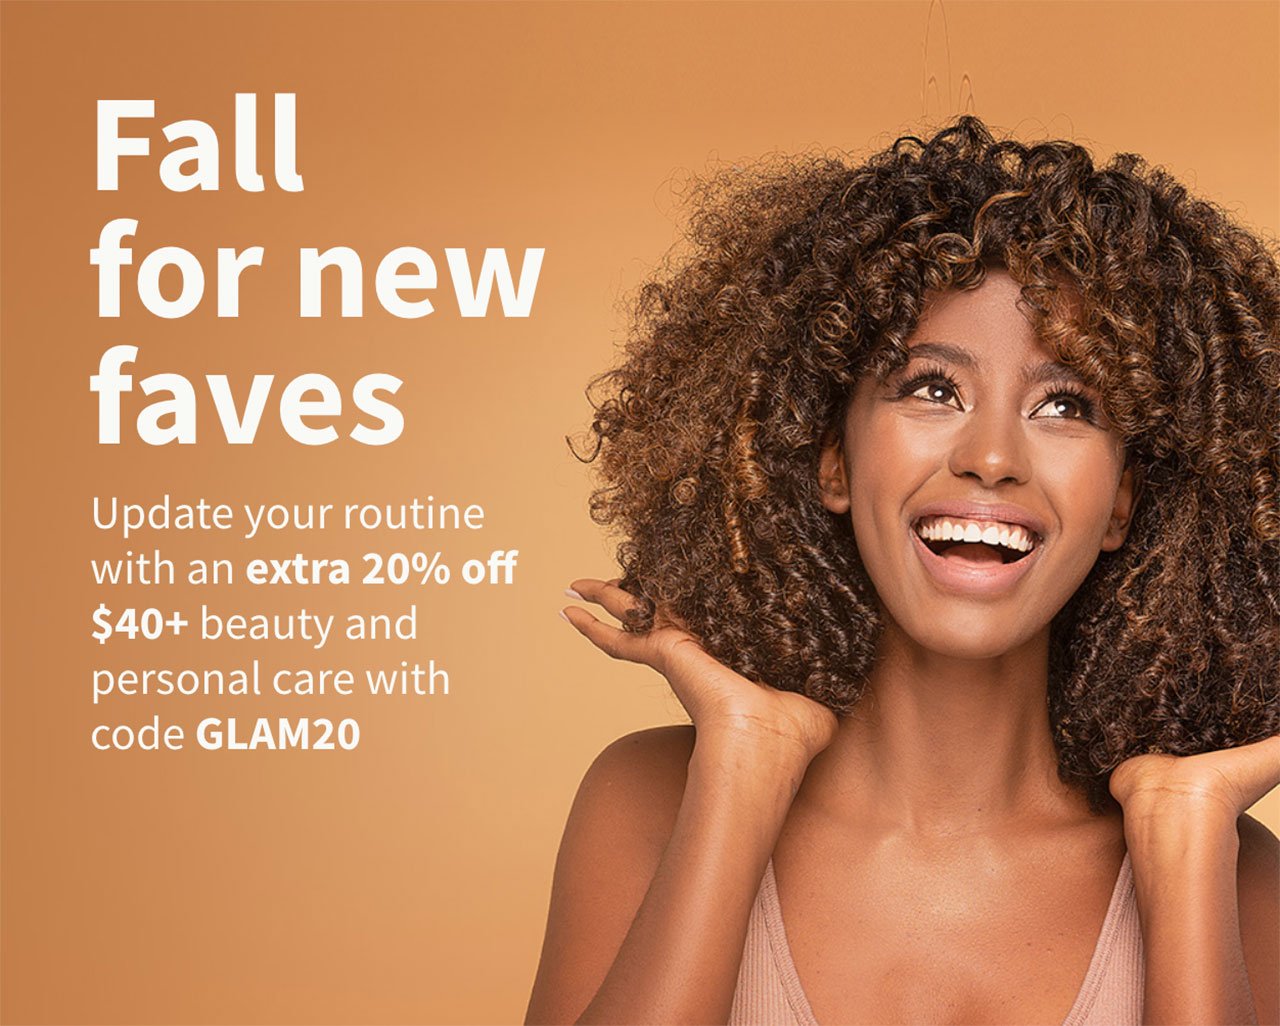 Fall for new faves. Update your routine with an extra 20% off $40 beauty and personal care with code GLAM20.